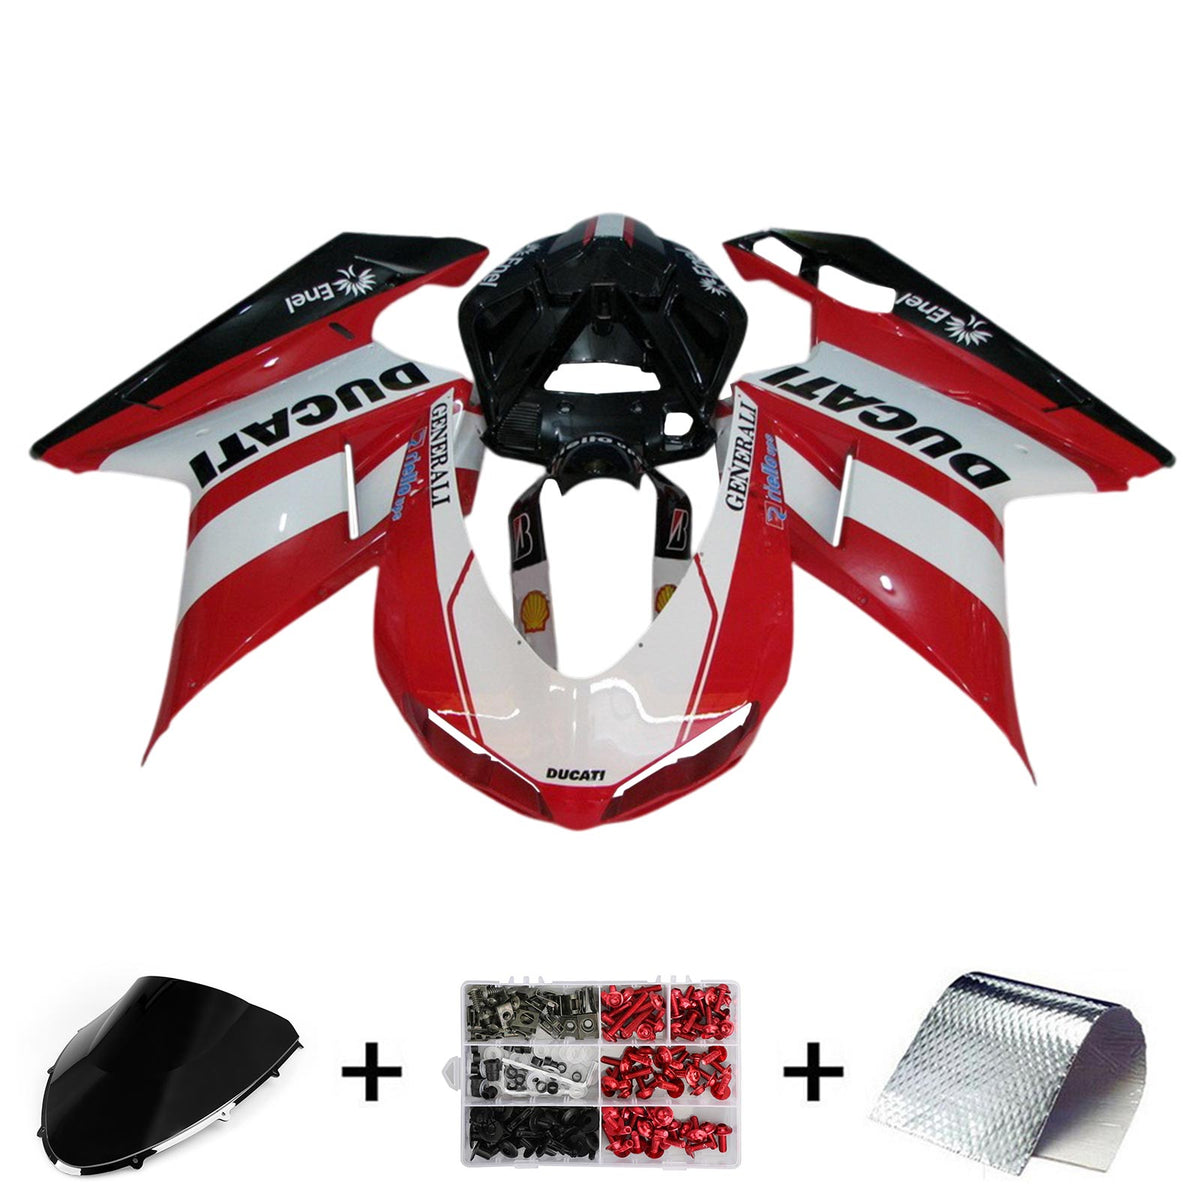 Amotopart All Years Ducati 1098 1198 848 Red&White Style1 Fairing Kit